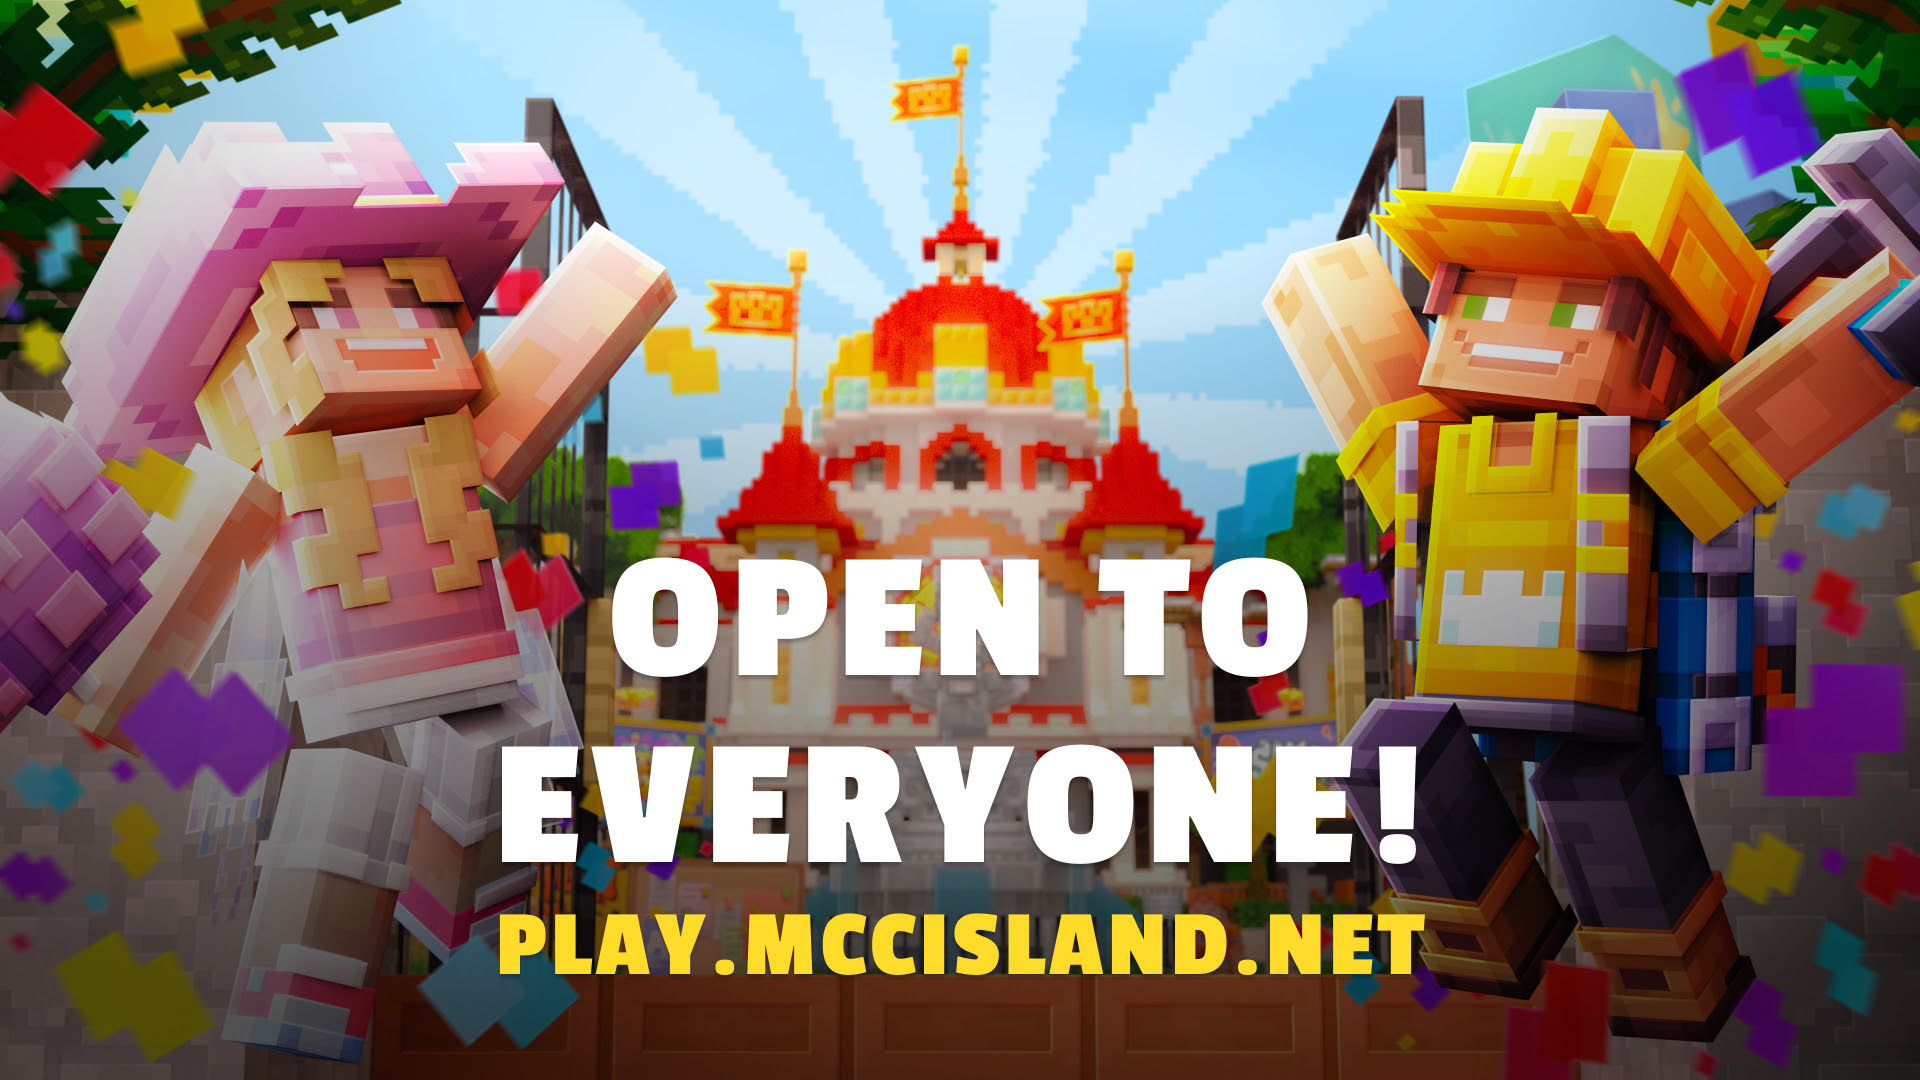 A female and male Minecraft character cheer behind a logo that reads "OPEN TO EVERYONE"